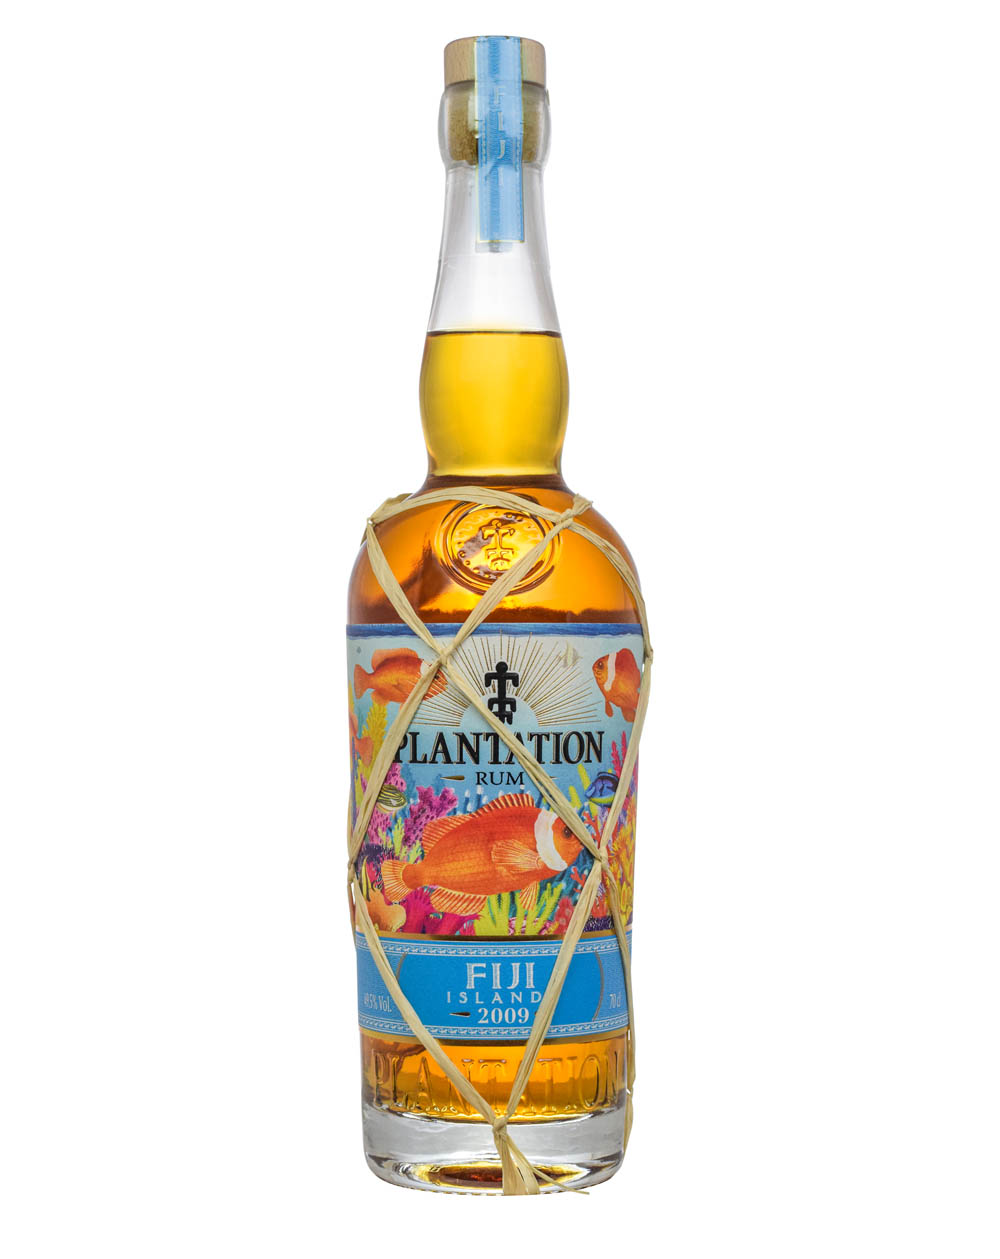 Plantation Rum 13 Years Old Fiji Island 2009 Cask #25 Must Have Malts MHM (1)